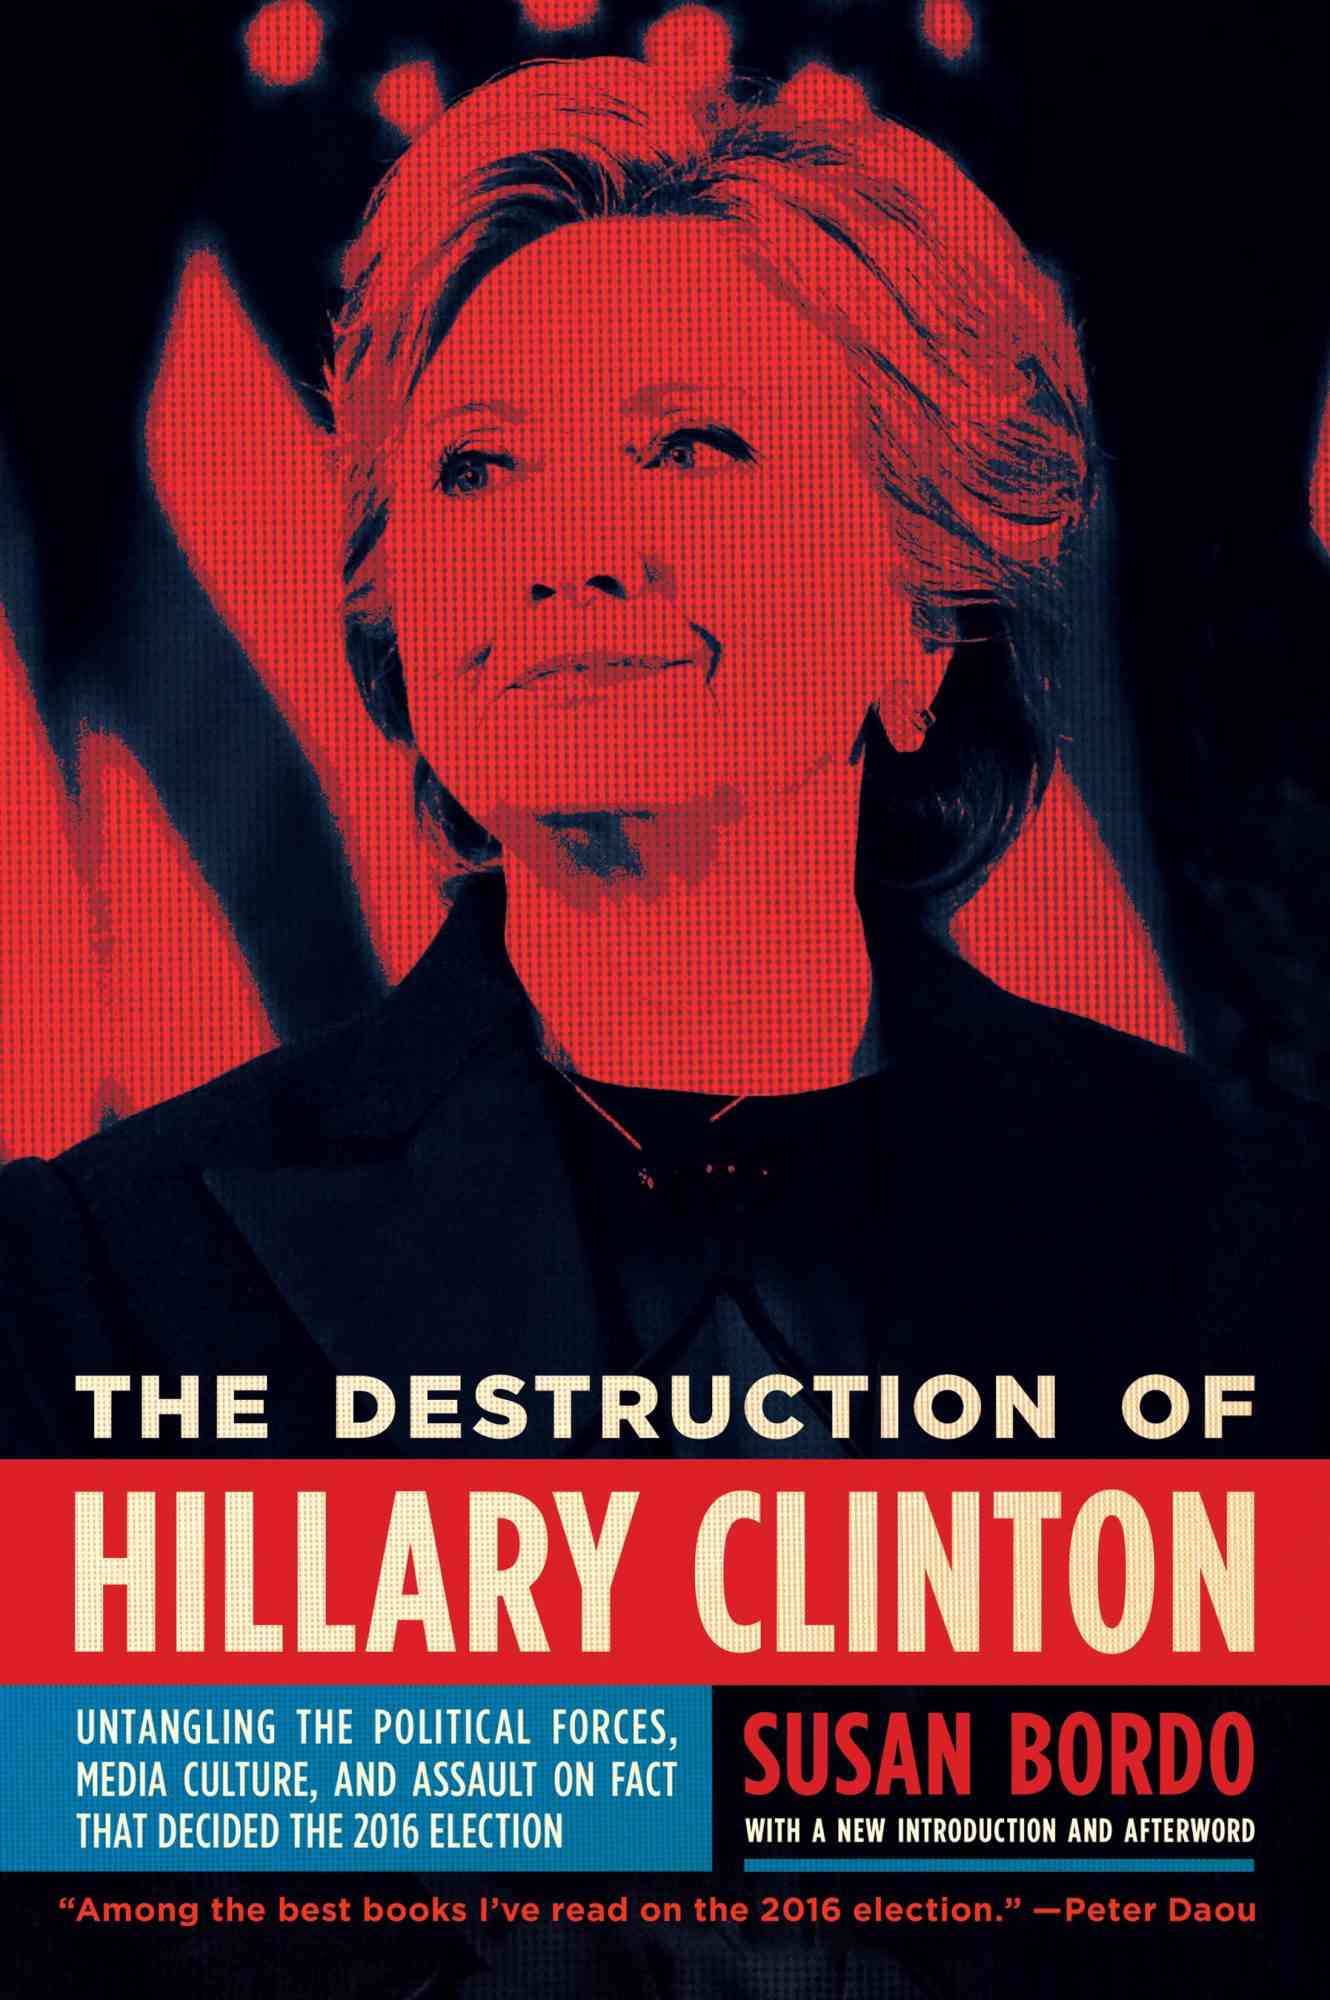 For the gender and politics watcher:&nbsp;The Destruction of Hillary Clinton&nbsp;by Susan Bordo